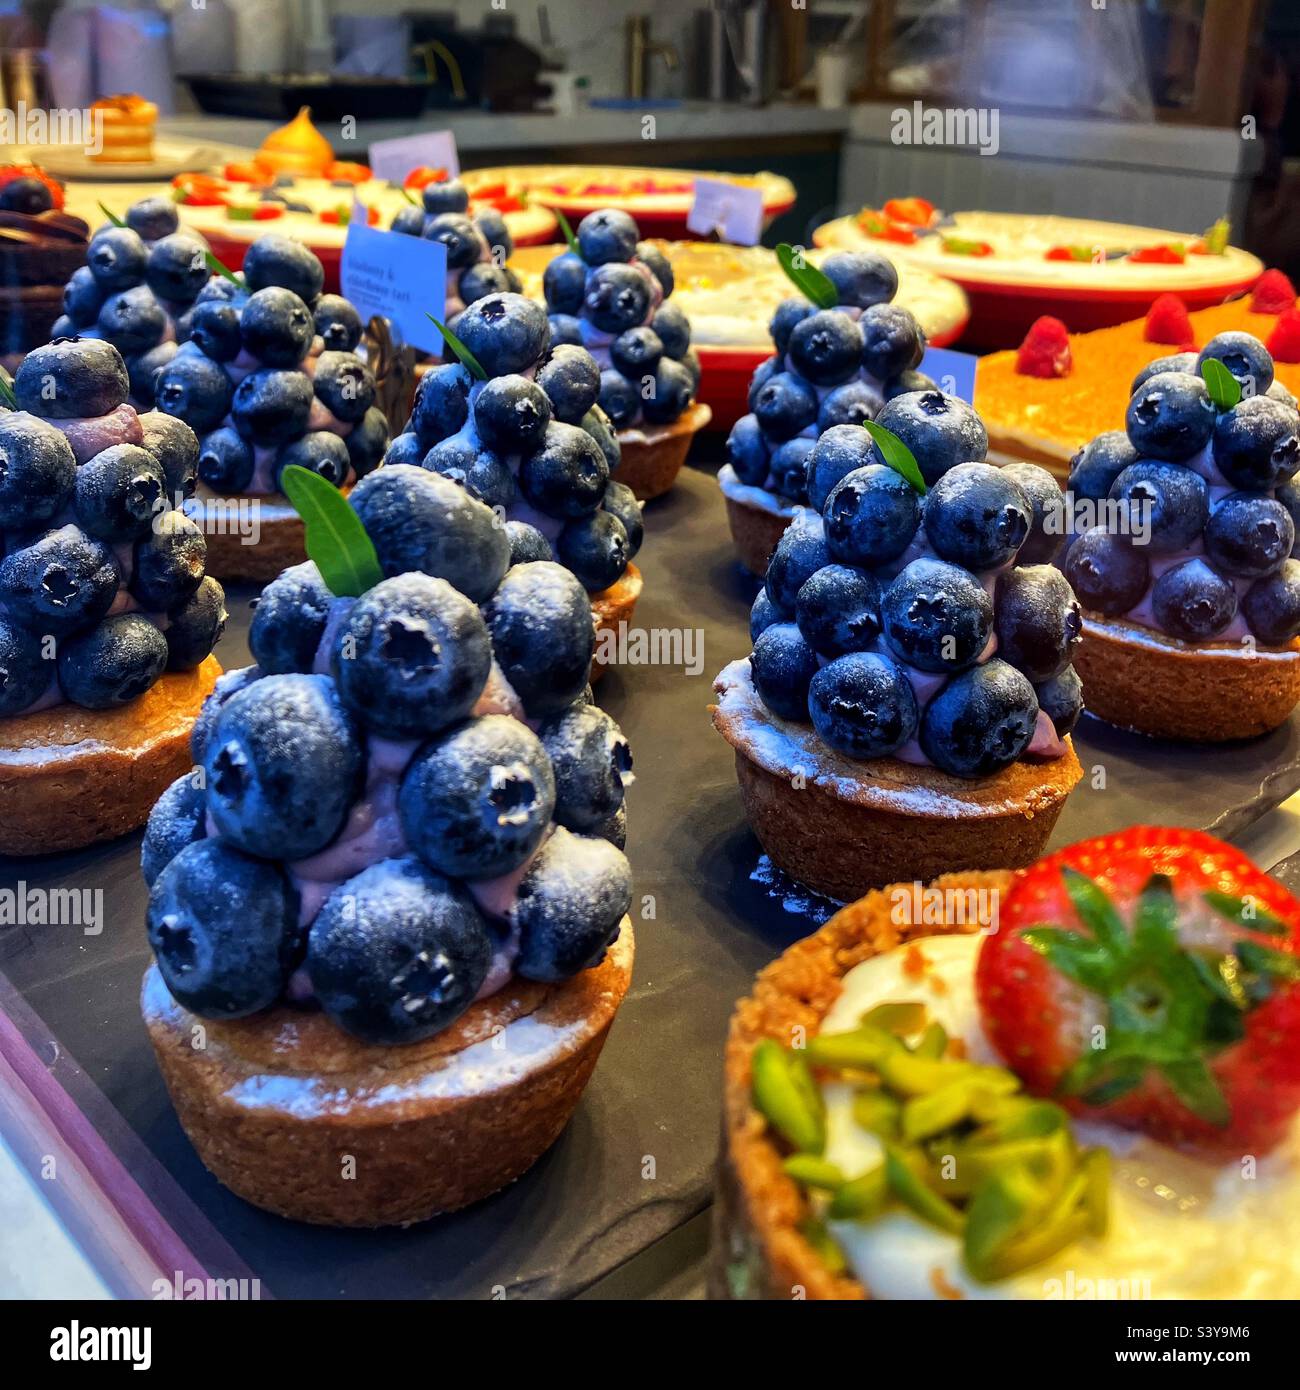 Blueberry tartlets and other cakes in the window of a cafe patisserie Stock Photo